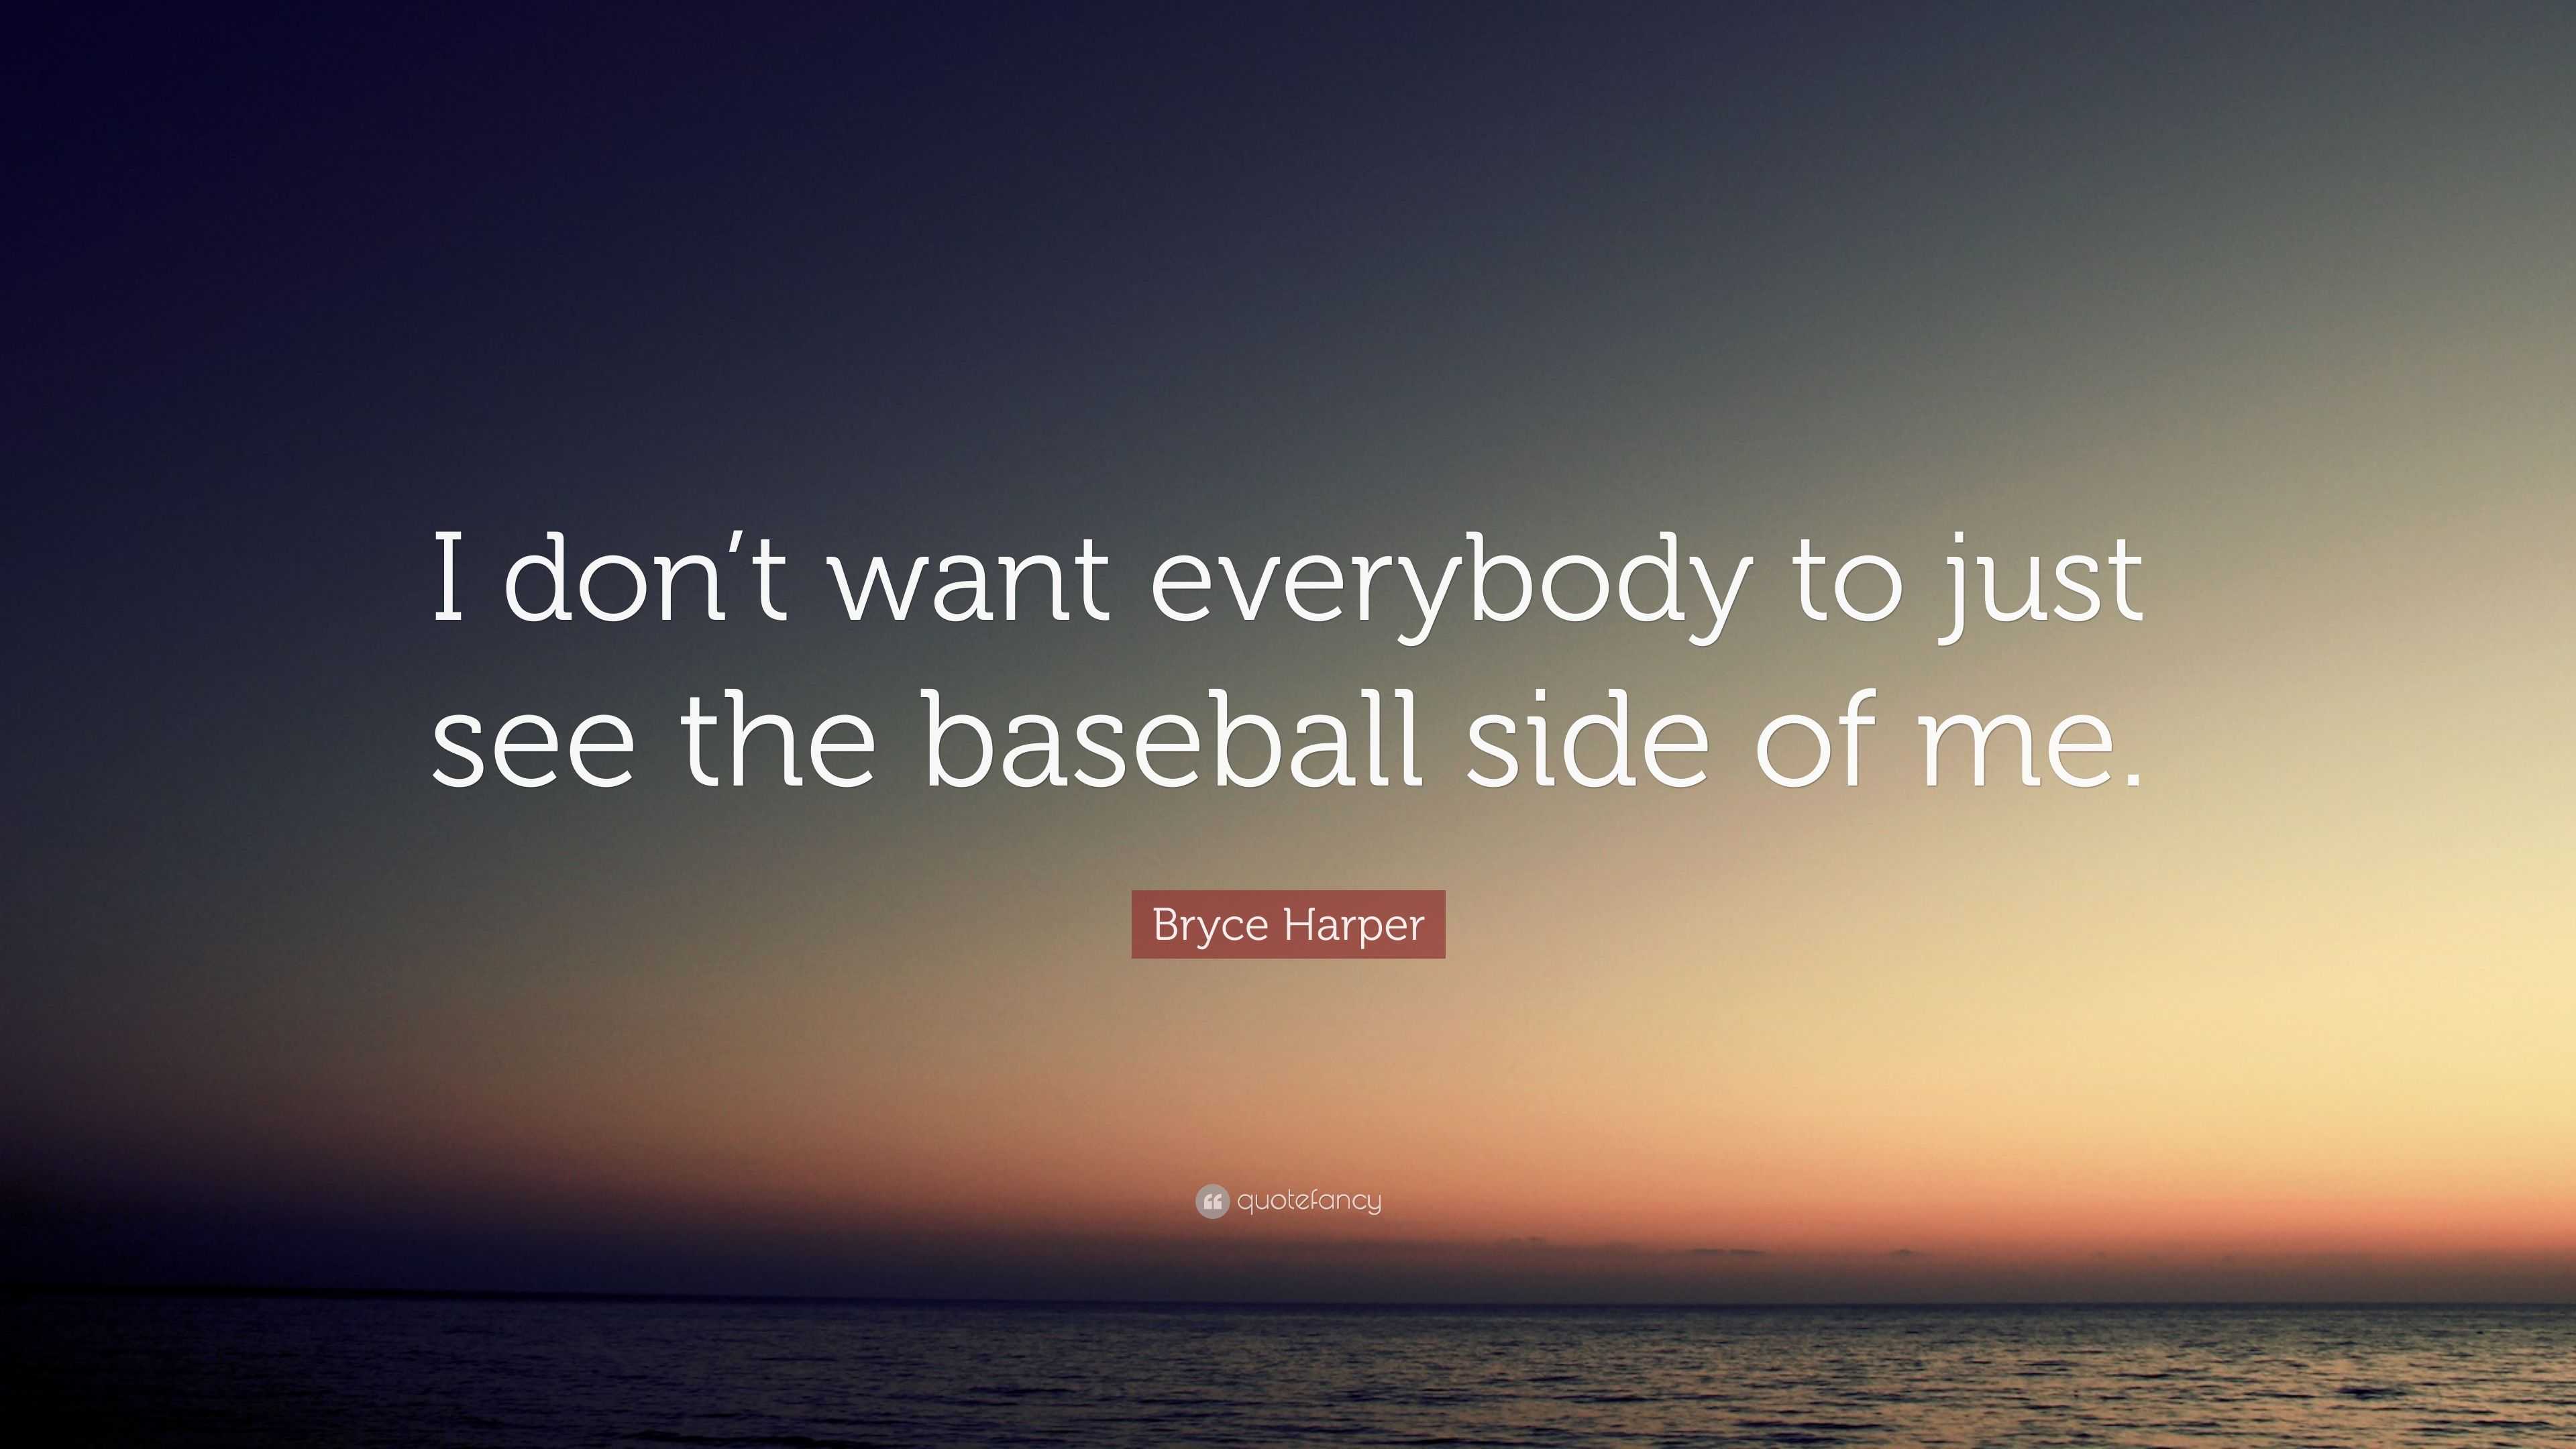 Bryce Harper Quote: “I don’t want everybody to just see the baseball ...